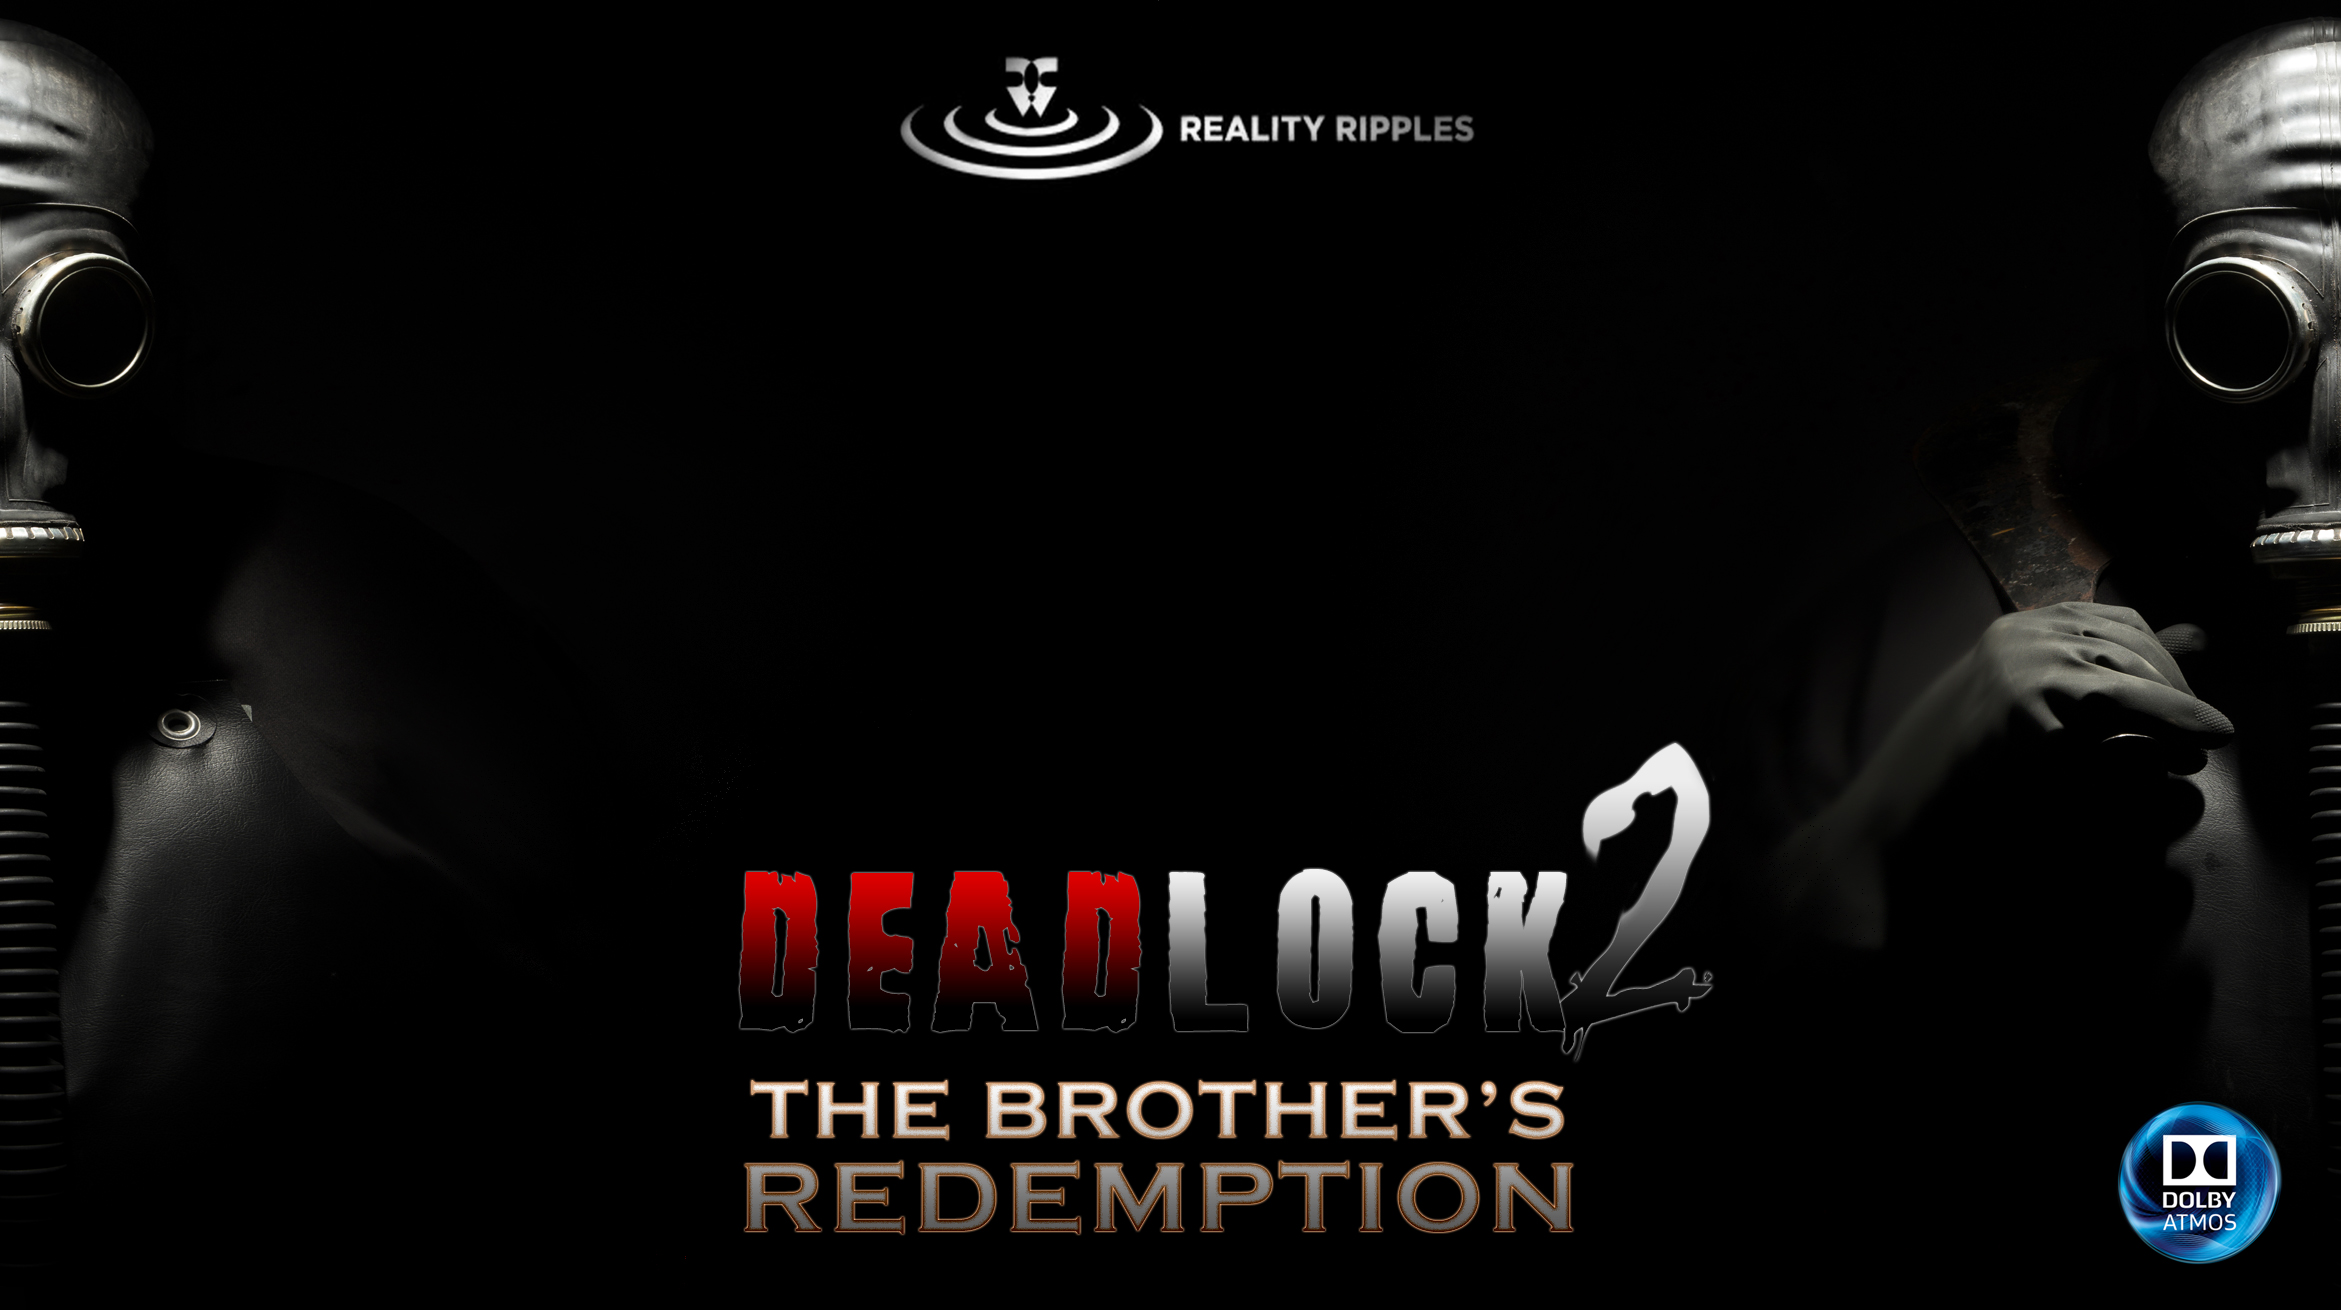 Deadlock "The Brother's Redemption"